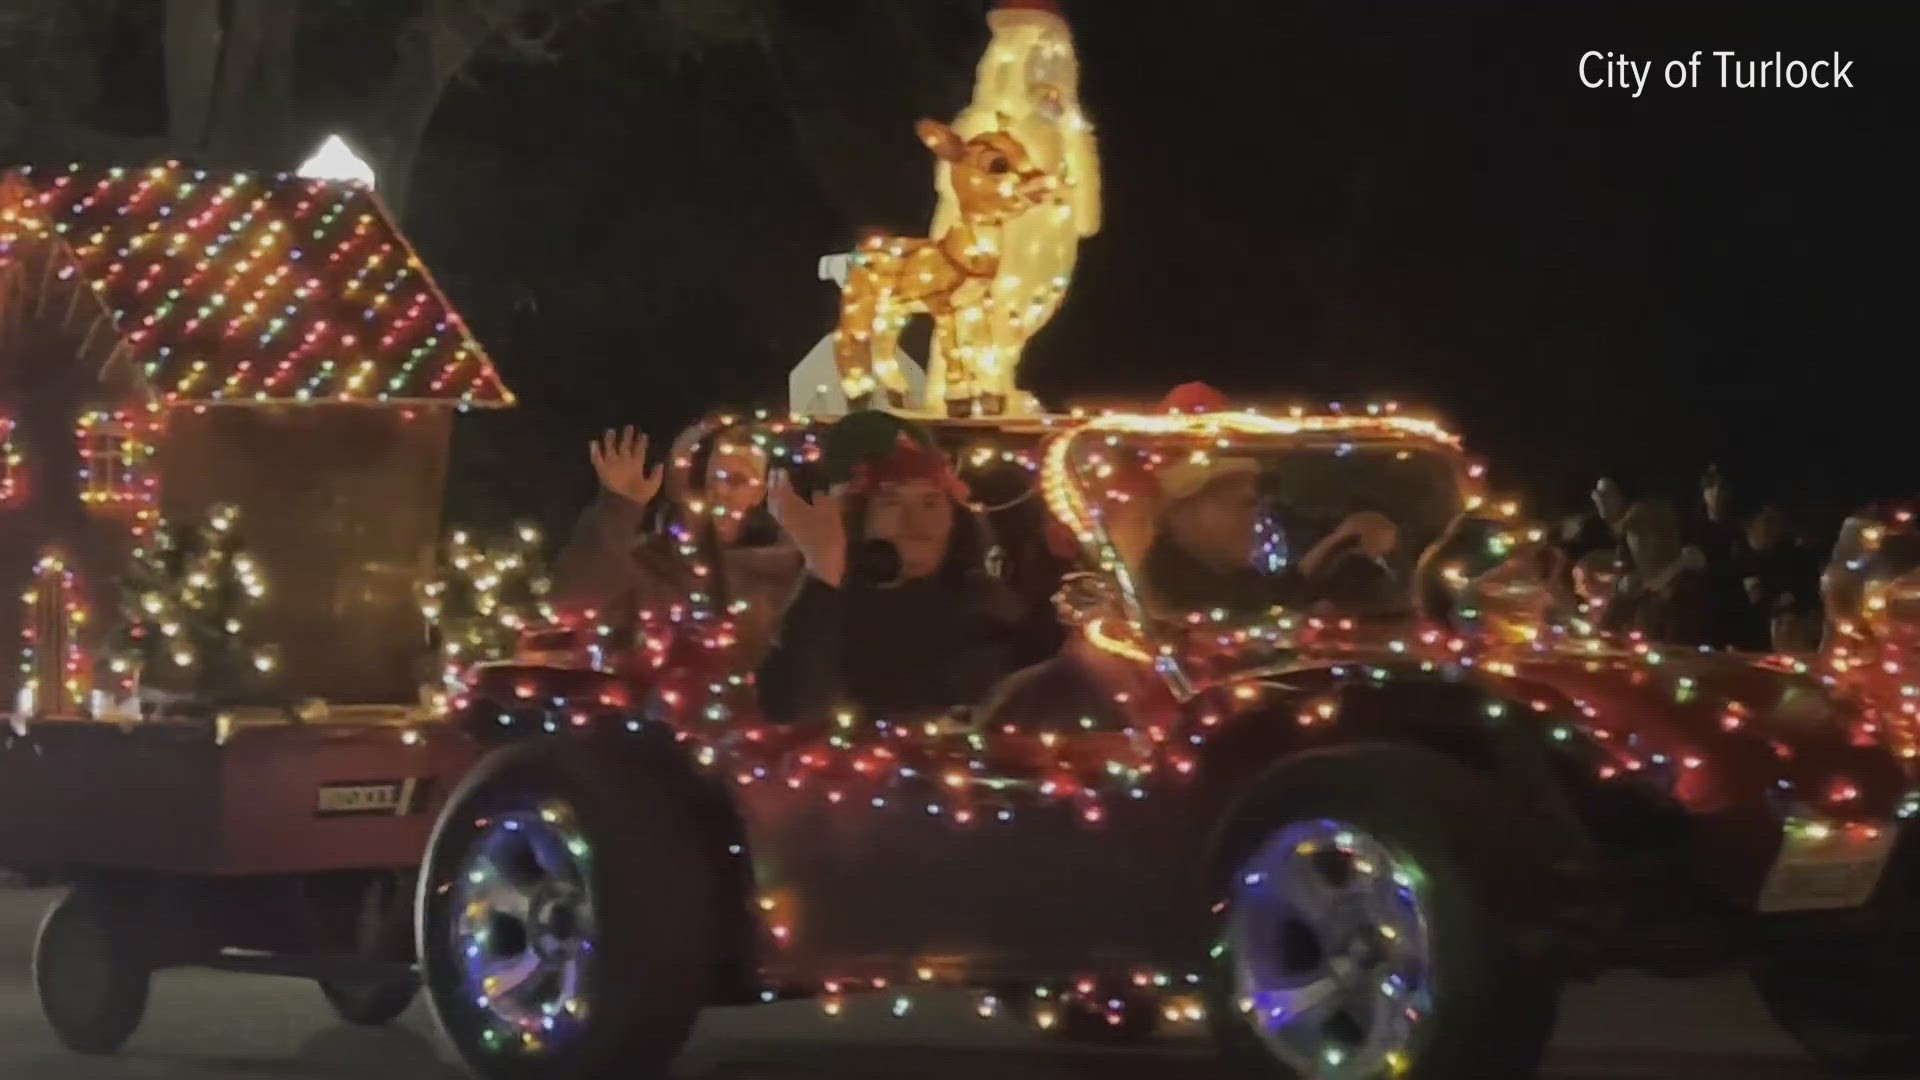 Thousands eagerly await downtown Turlock Christmas parade